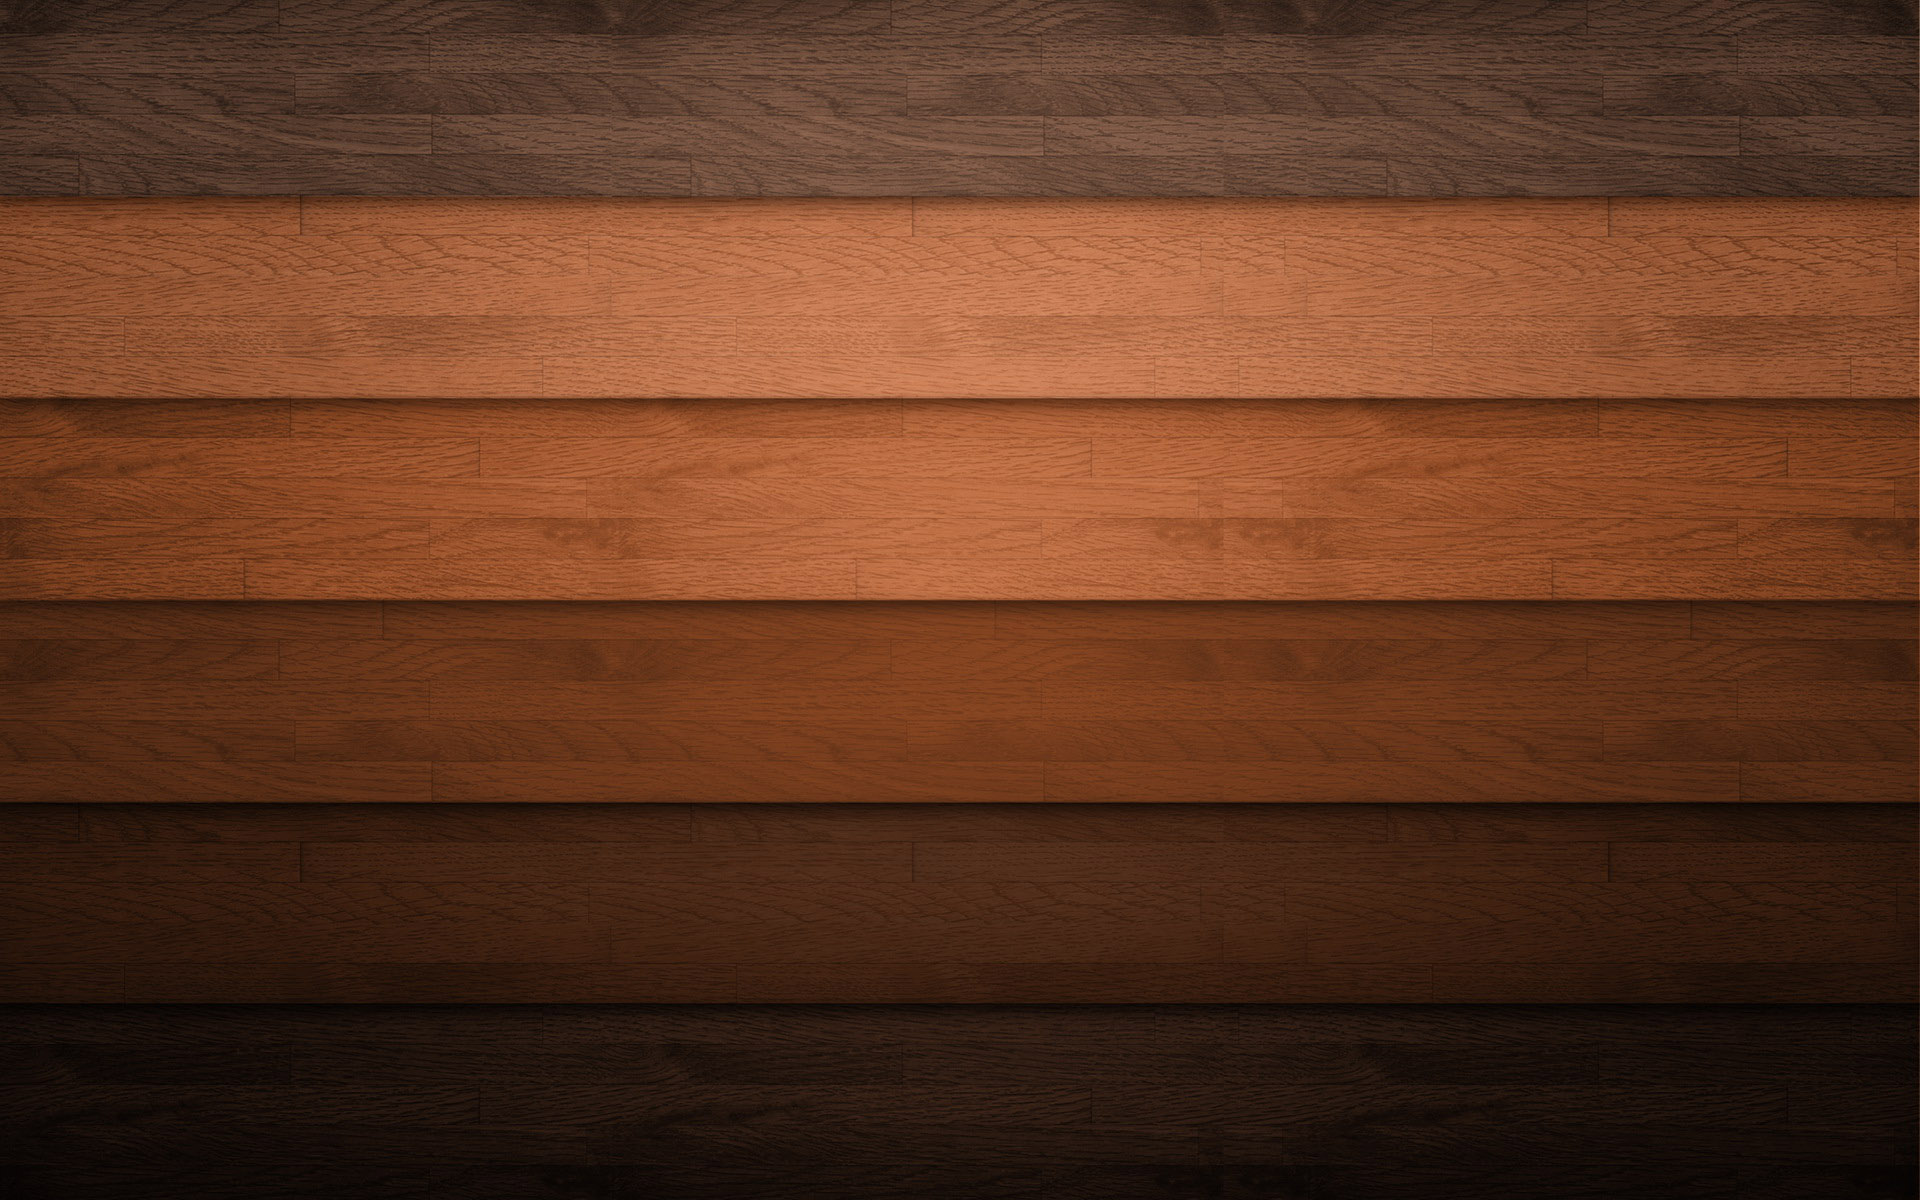  Simple Wood Texture Cool Wallpaper 1920x1200 Full HD Wallpapers